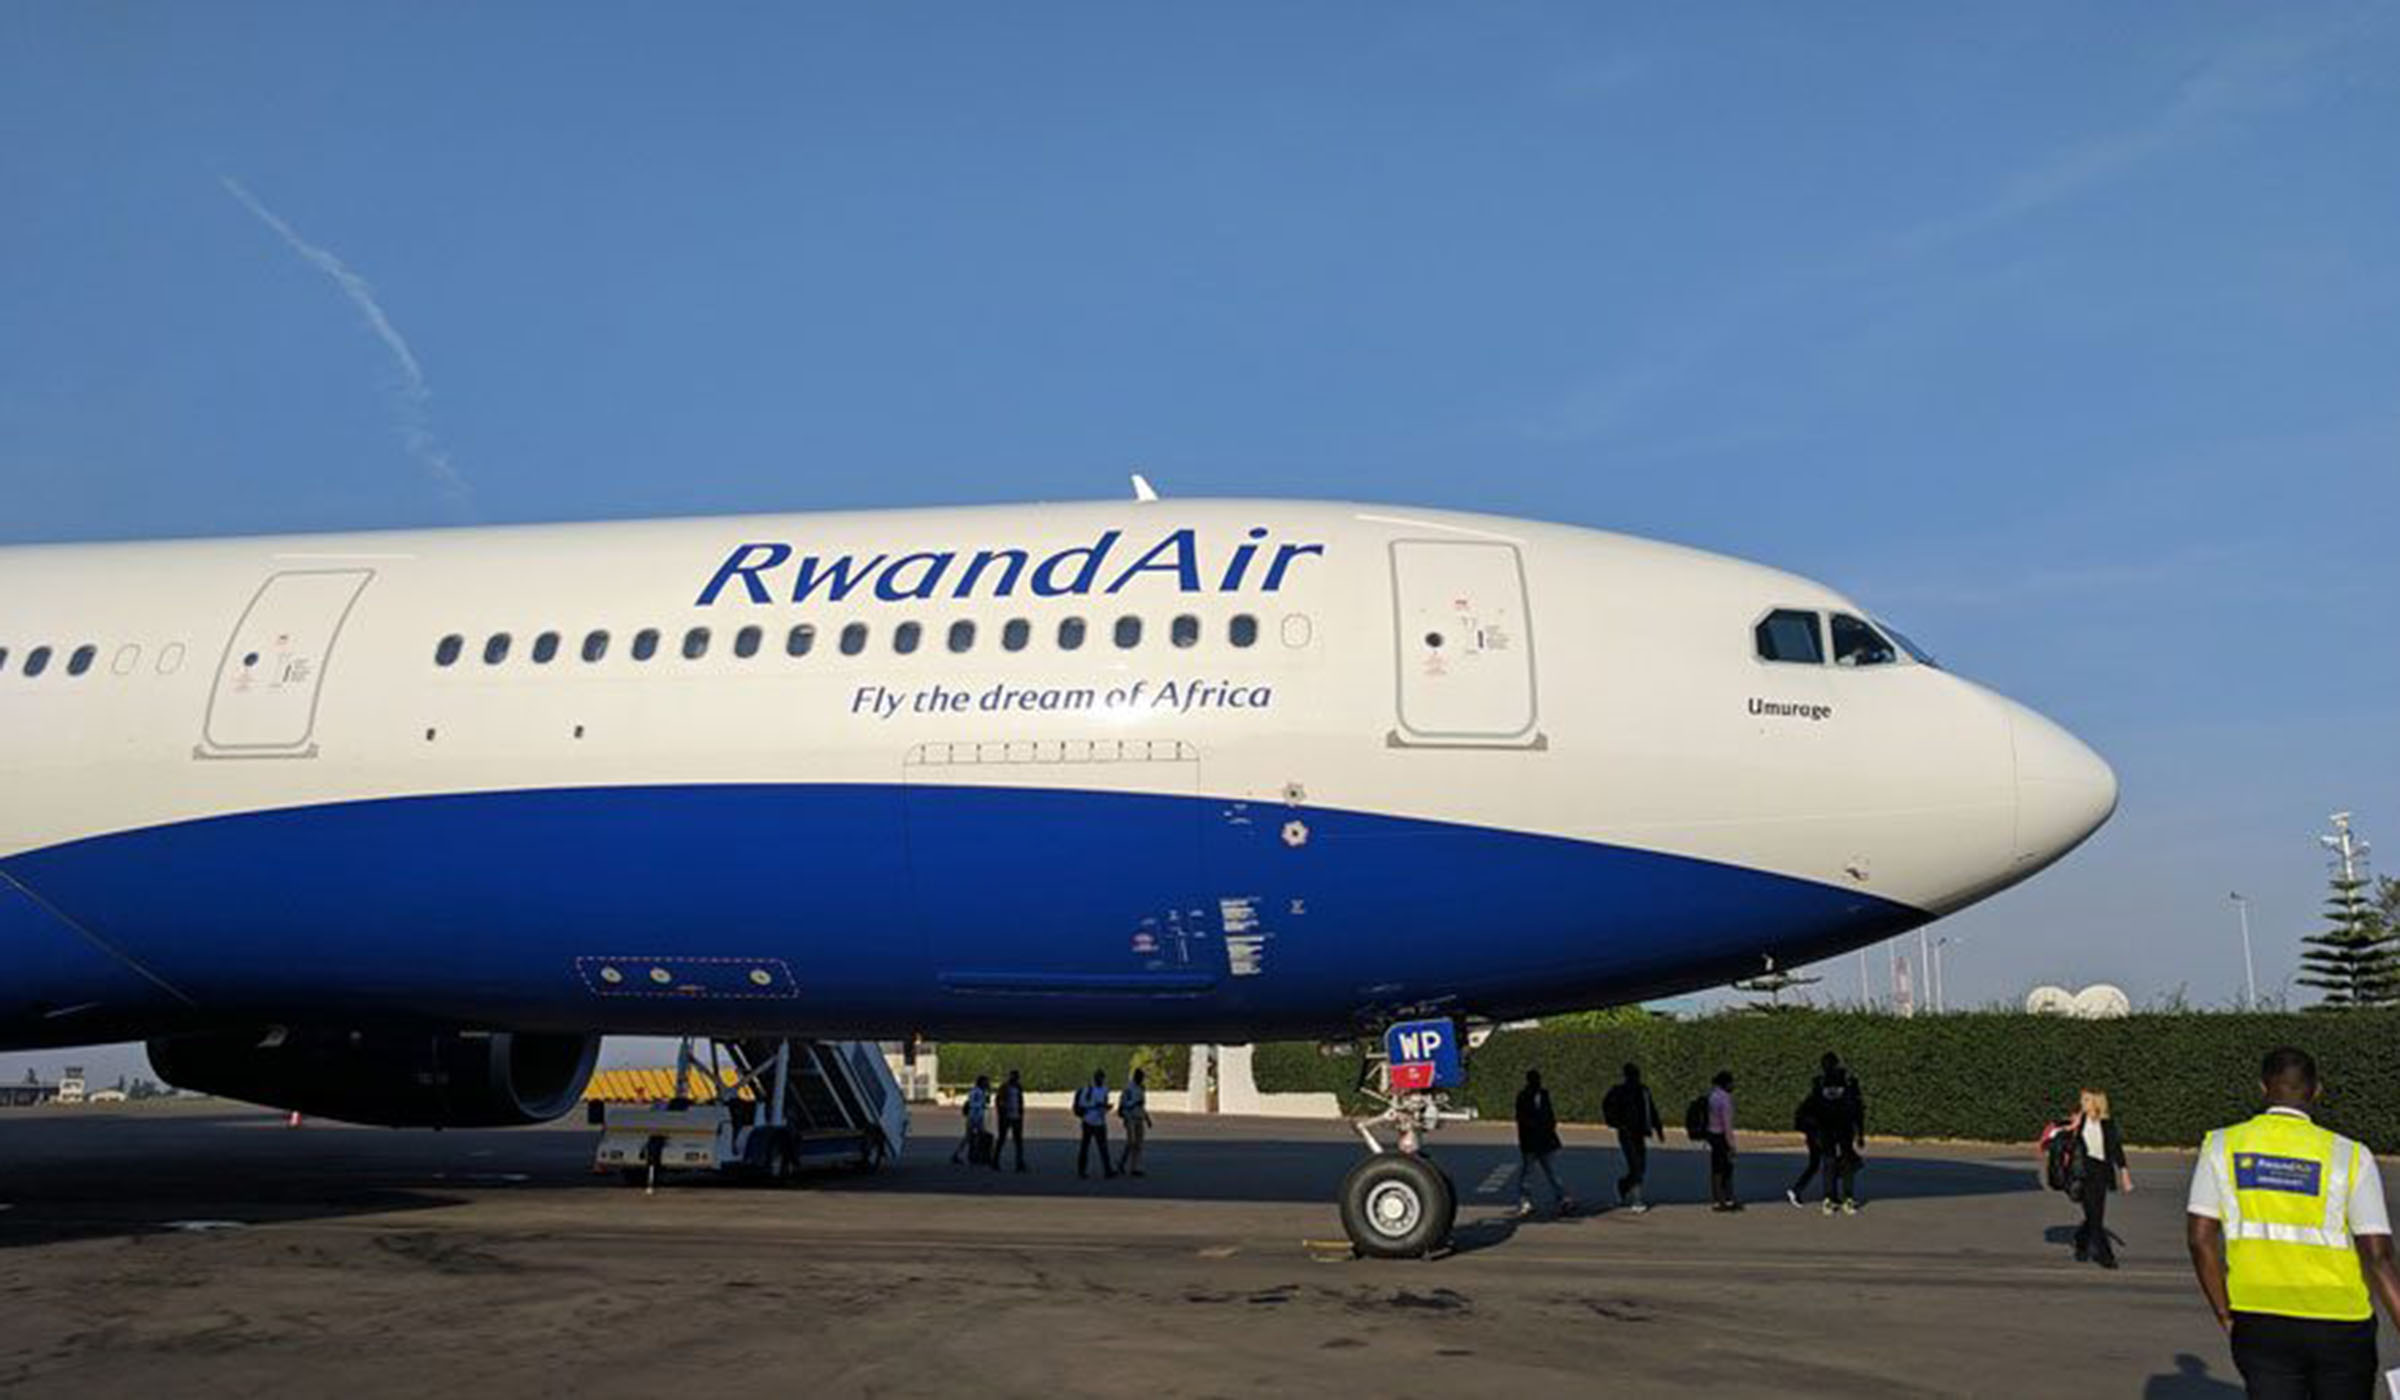 Members of the Private Sector Federation travelled to DRC on Wednesday for the launch of RwandAiru2019s maiden flight to Kishansa. /James Karuhanga